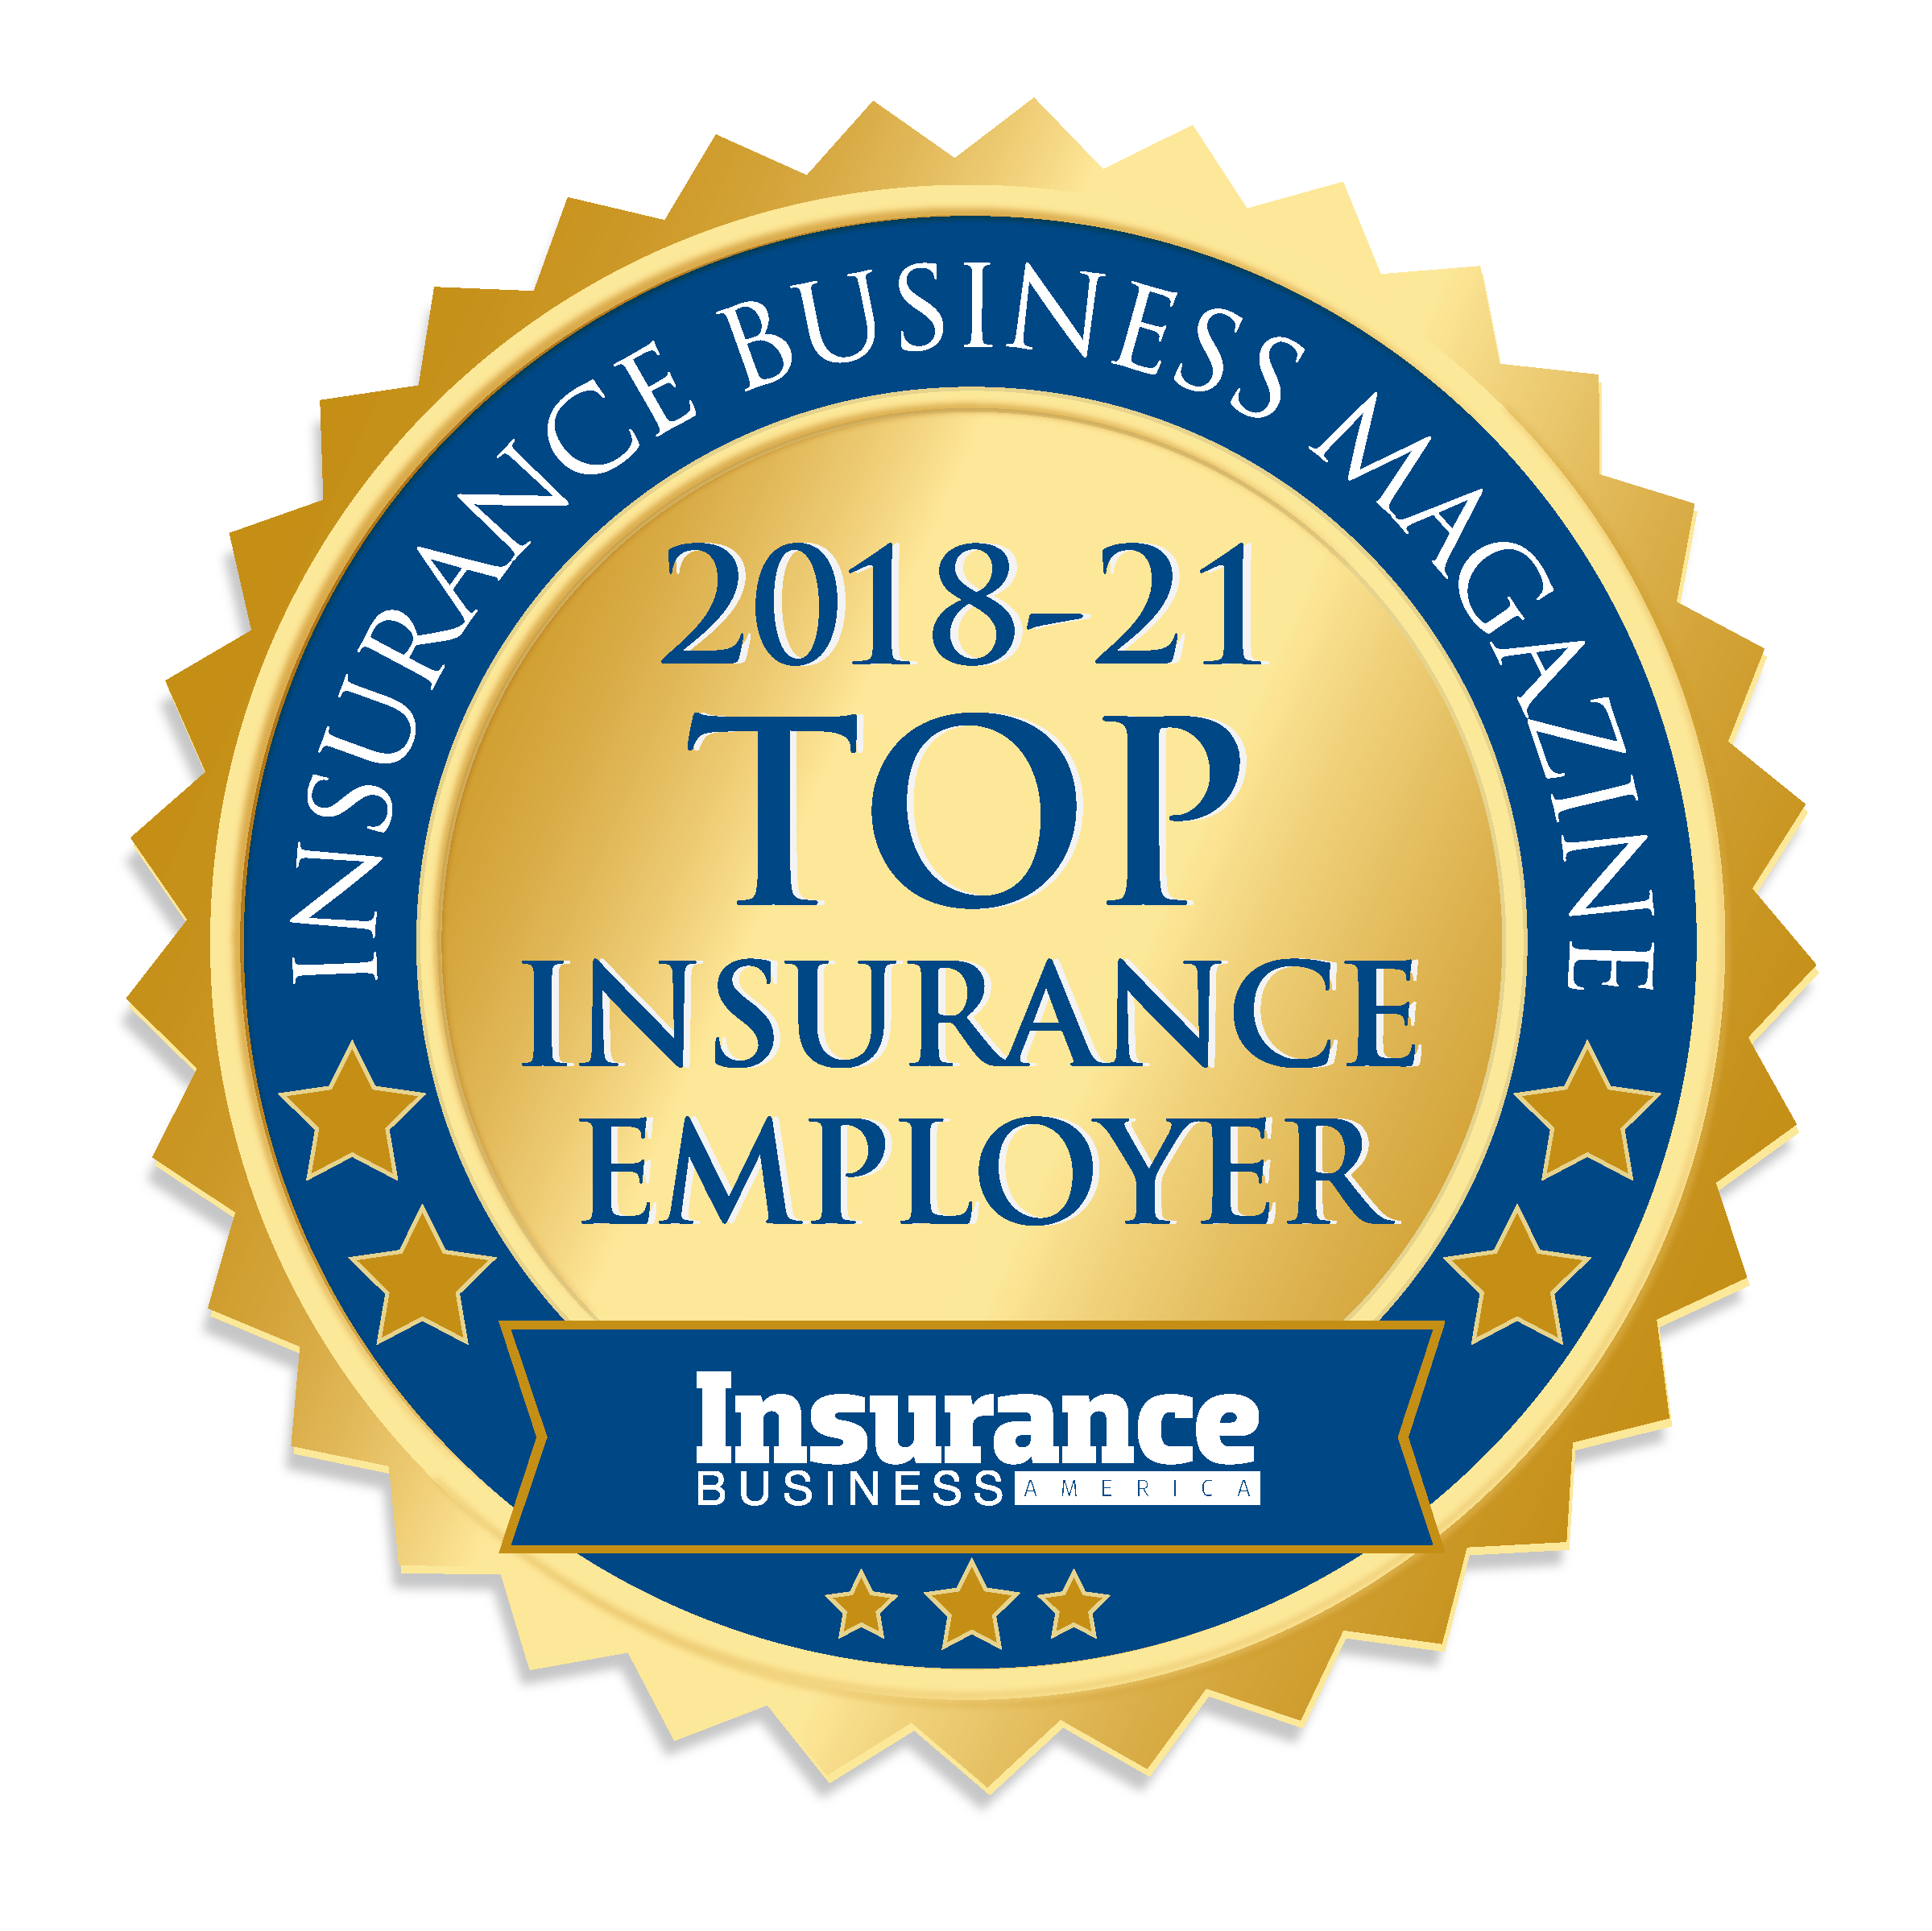 Top Insurance Employer 2018-21_USI Insurance Services Medal.png